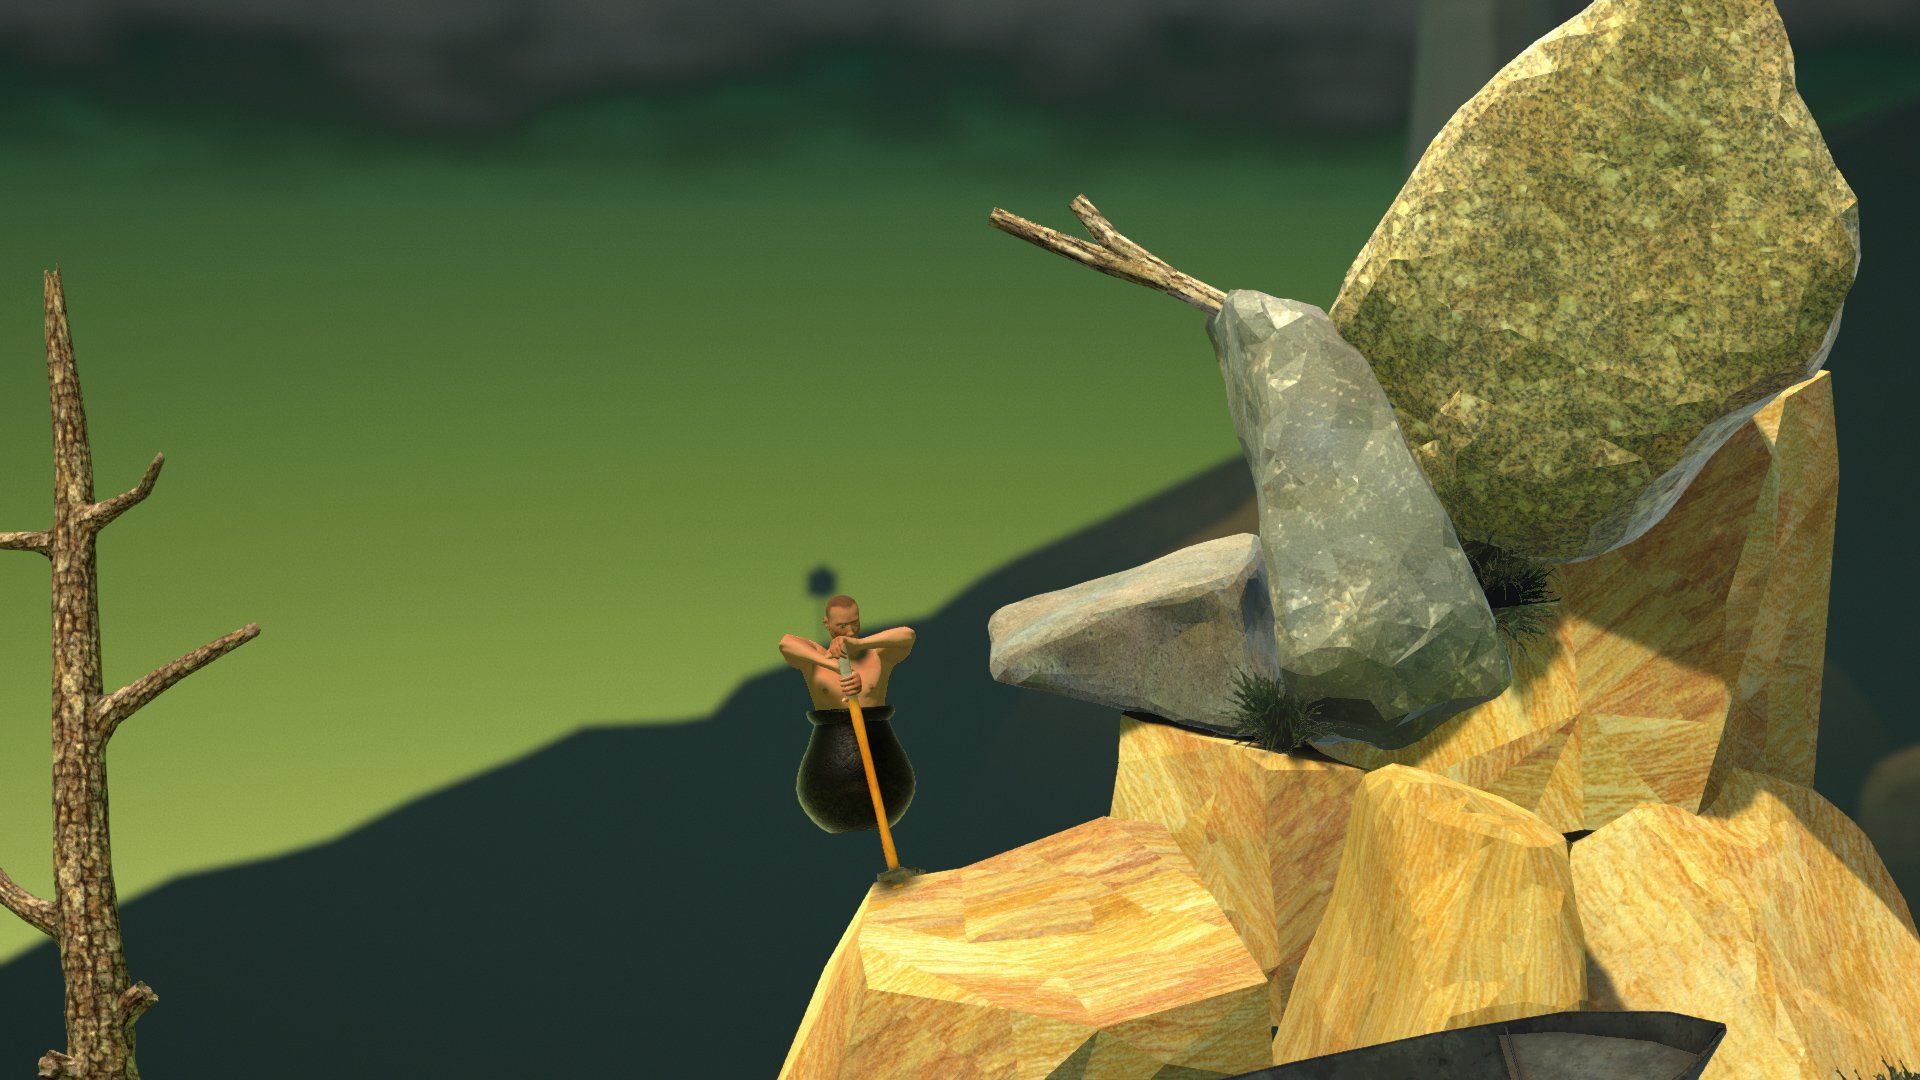 Getting Over It with Bennett Foddy HD Wallpaper. Background